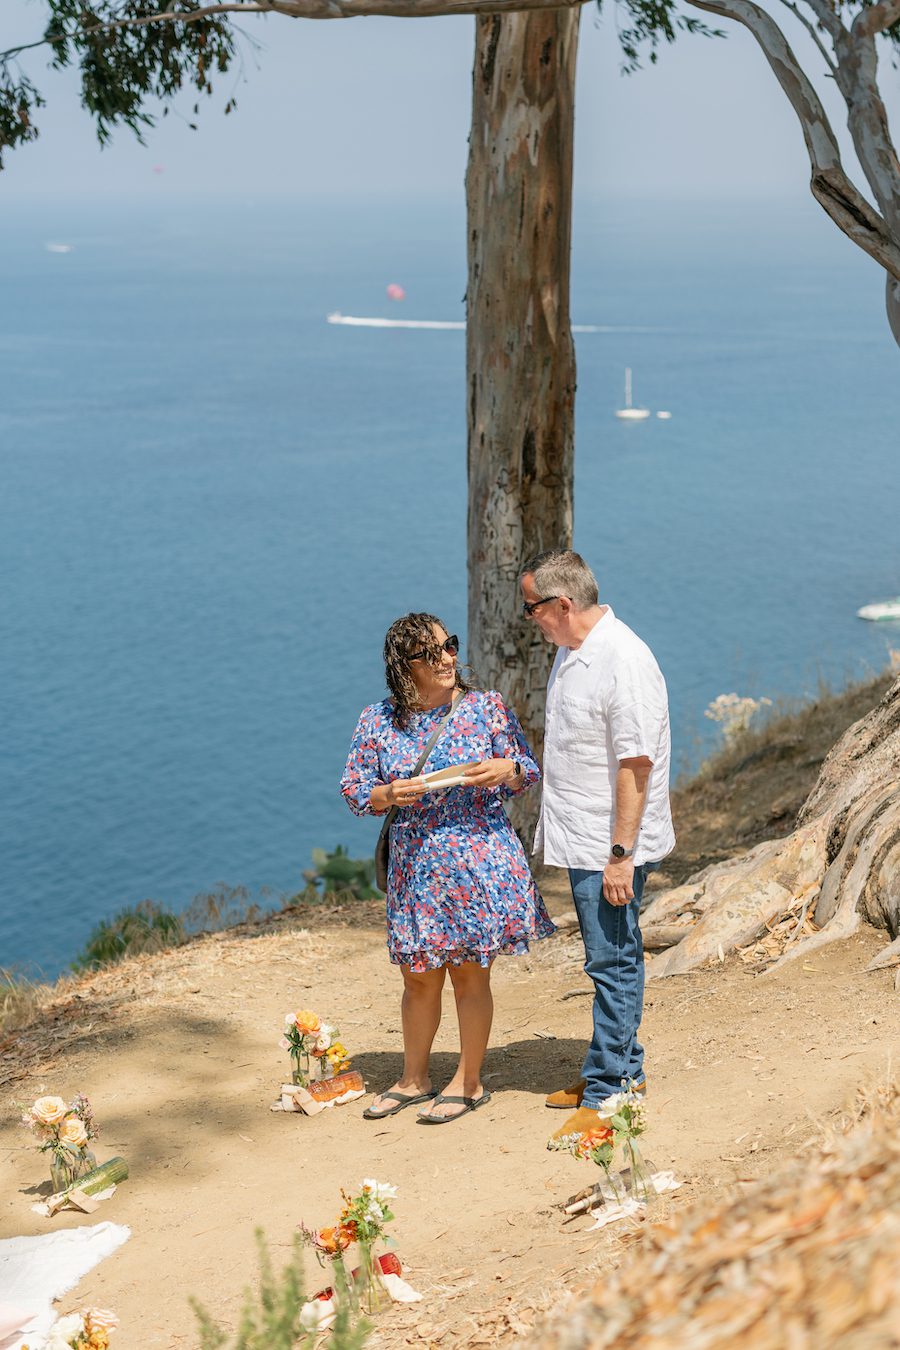 Private Picnic Proposal on Catalina Island. Charcuterie board, champagne, and picnic table set up for the proposal with an ocean view